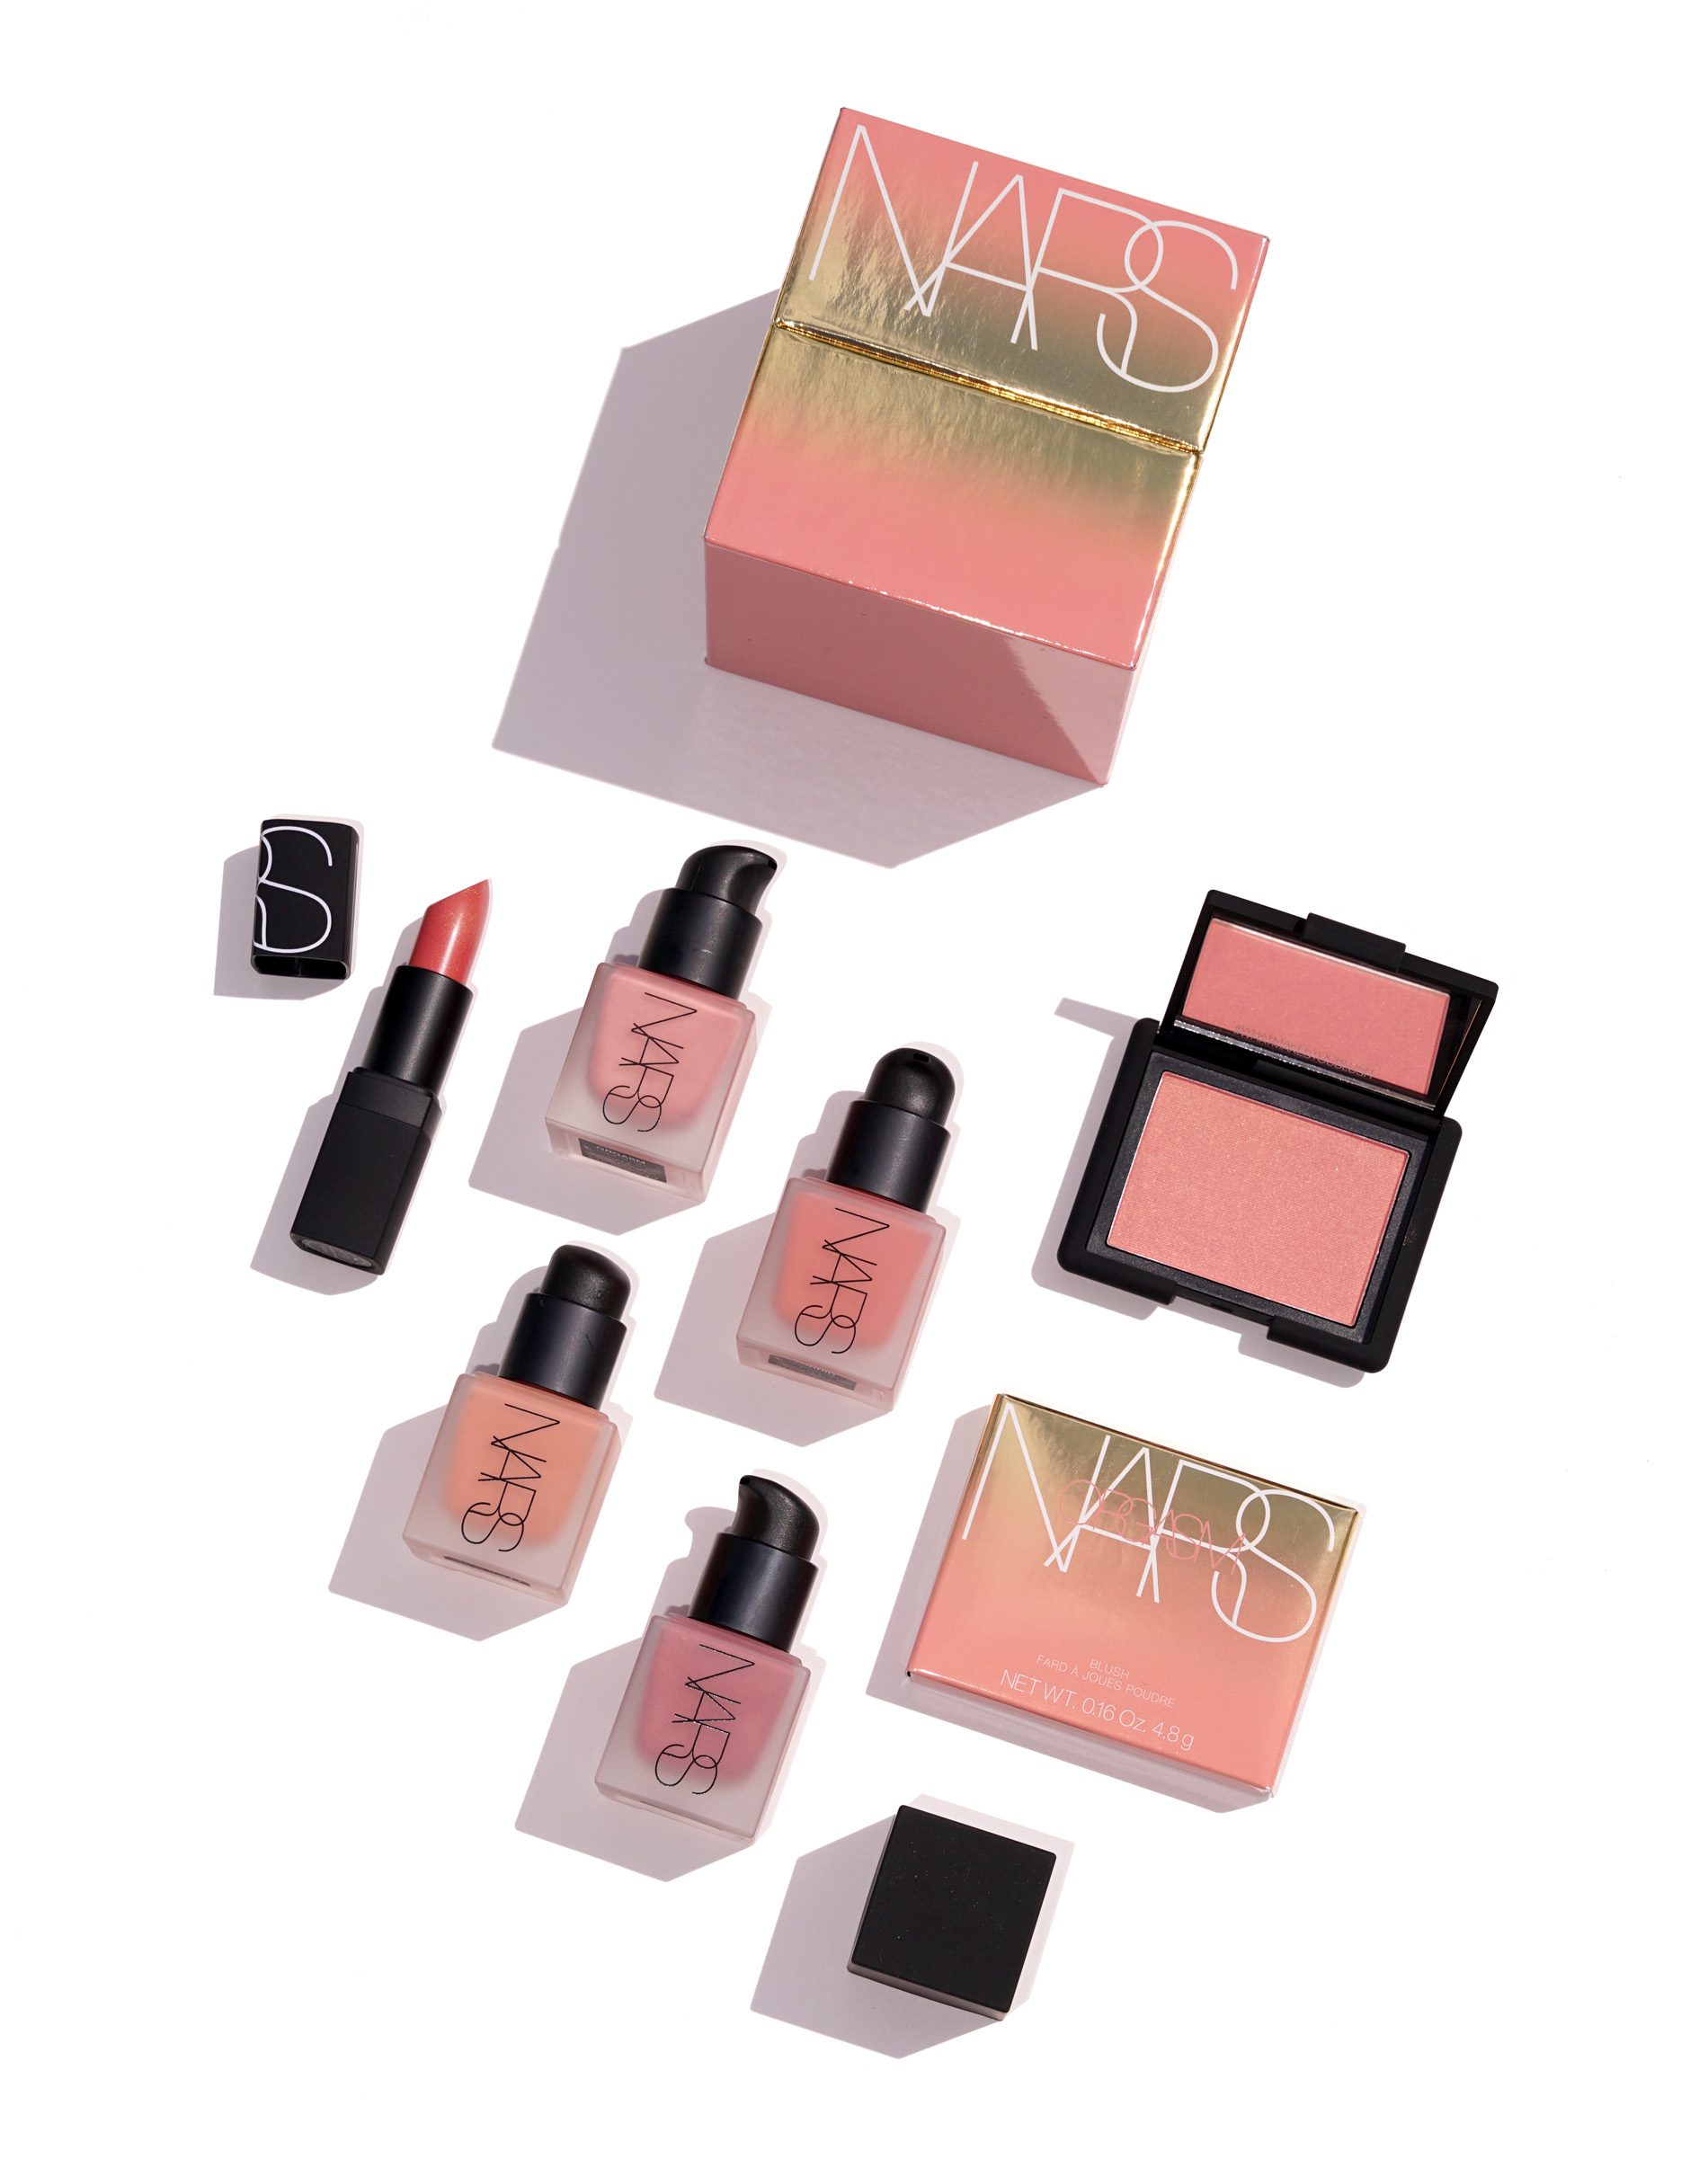 NARS blushes swatches 2017, Swatches